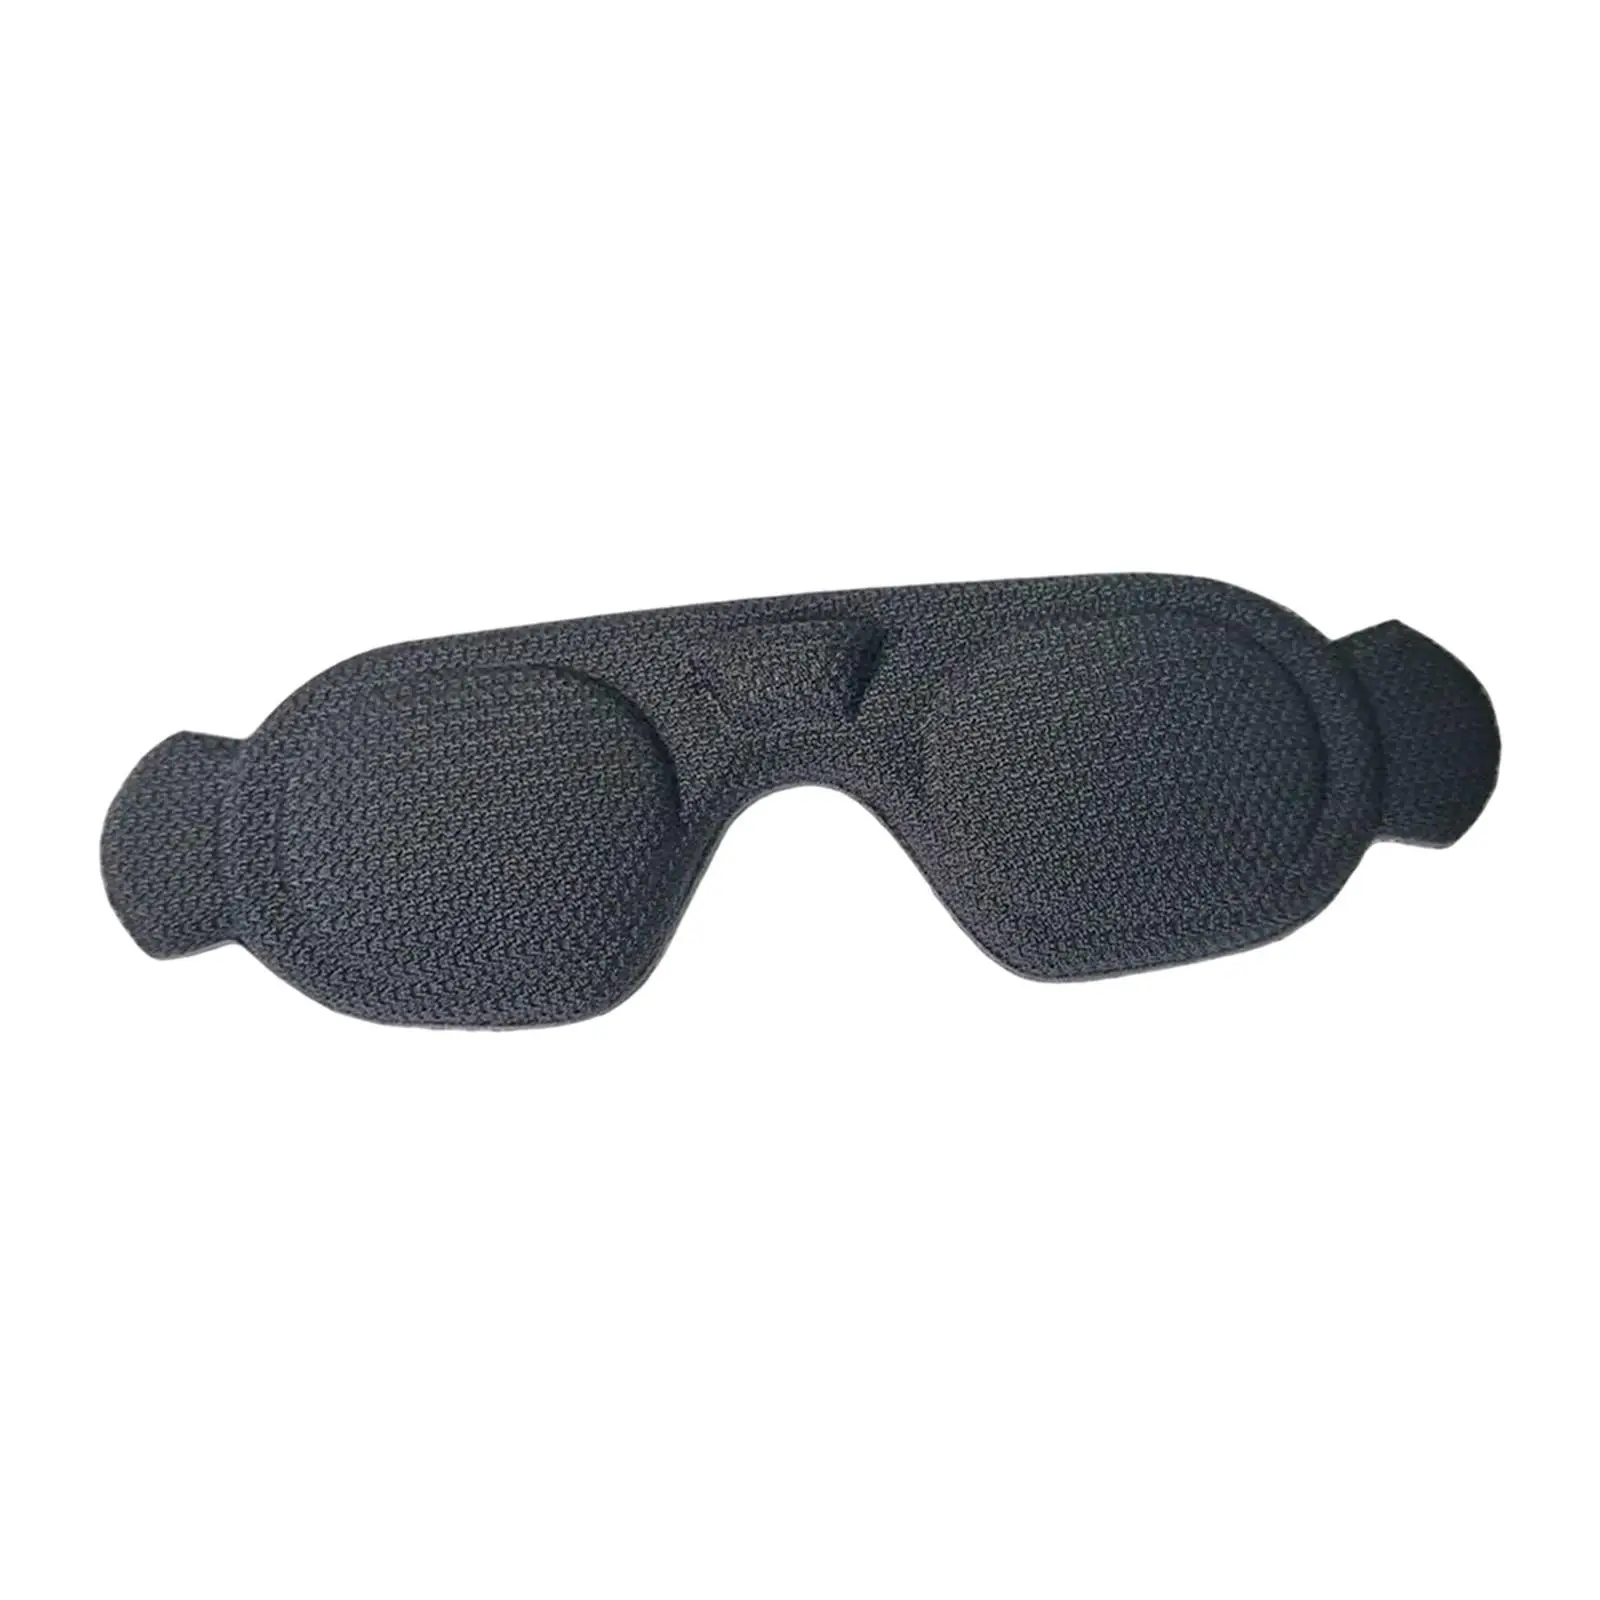 Lens Protector Lightproof Prevent Sunshine Light Sun Shade Lens Protection Cover Sunshade Pad for Goggles Integra Accessory